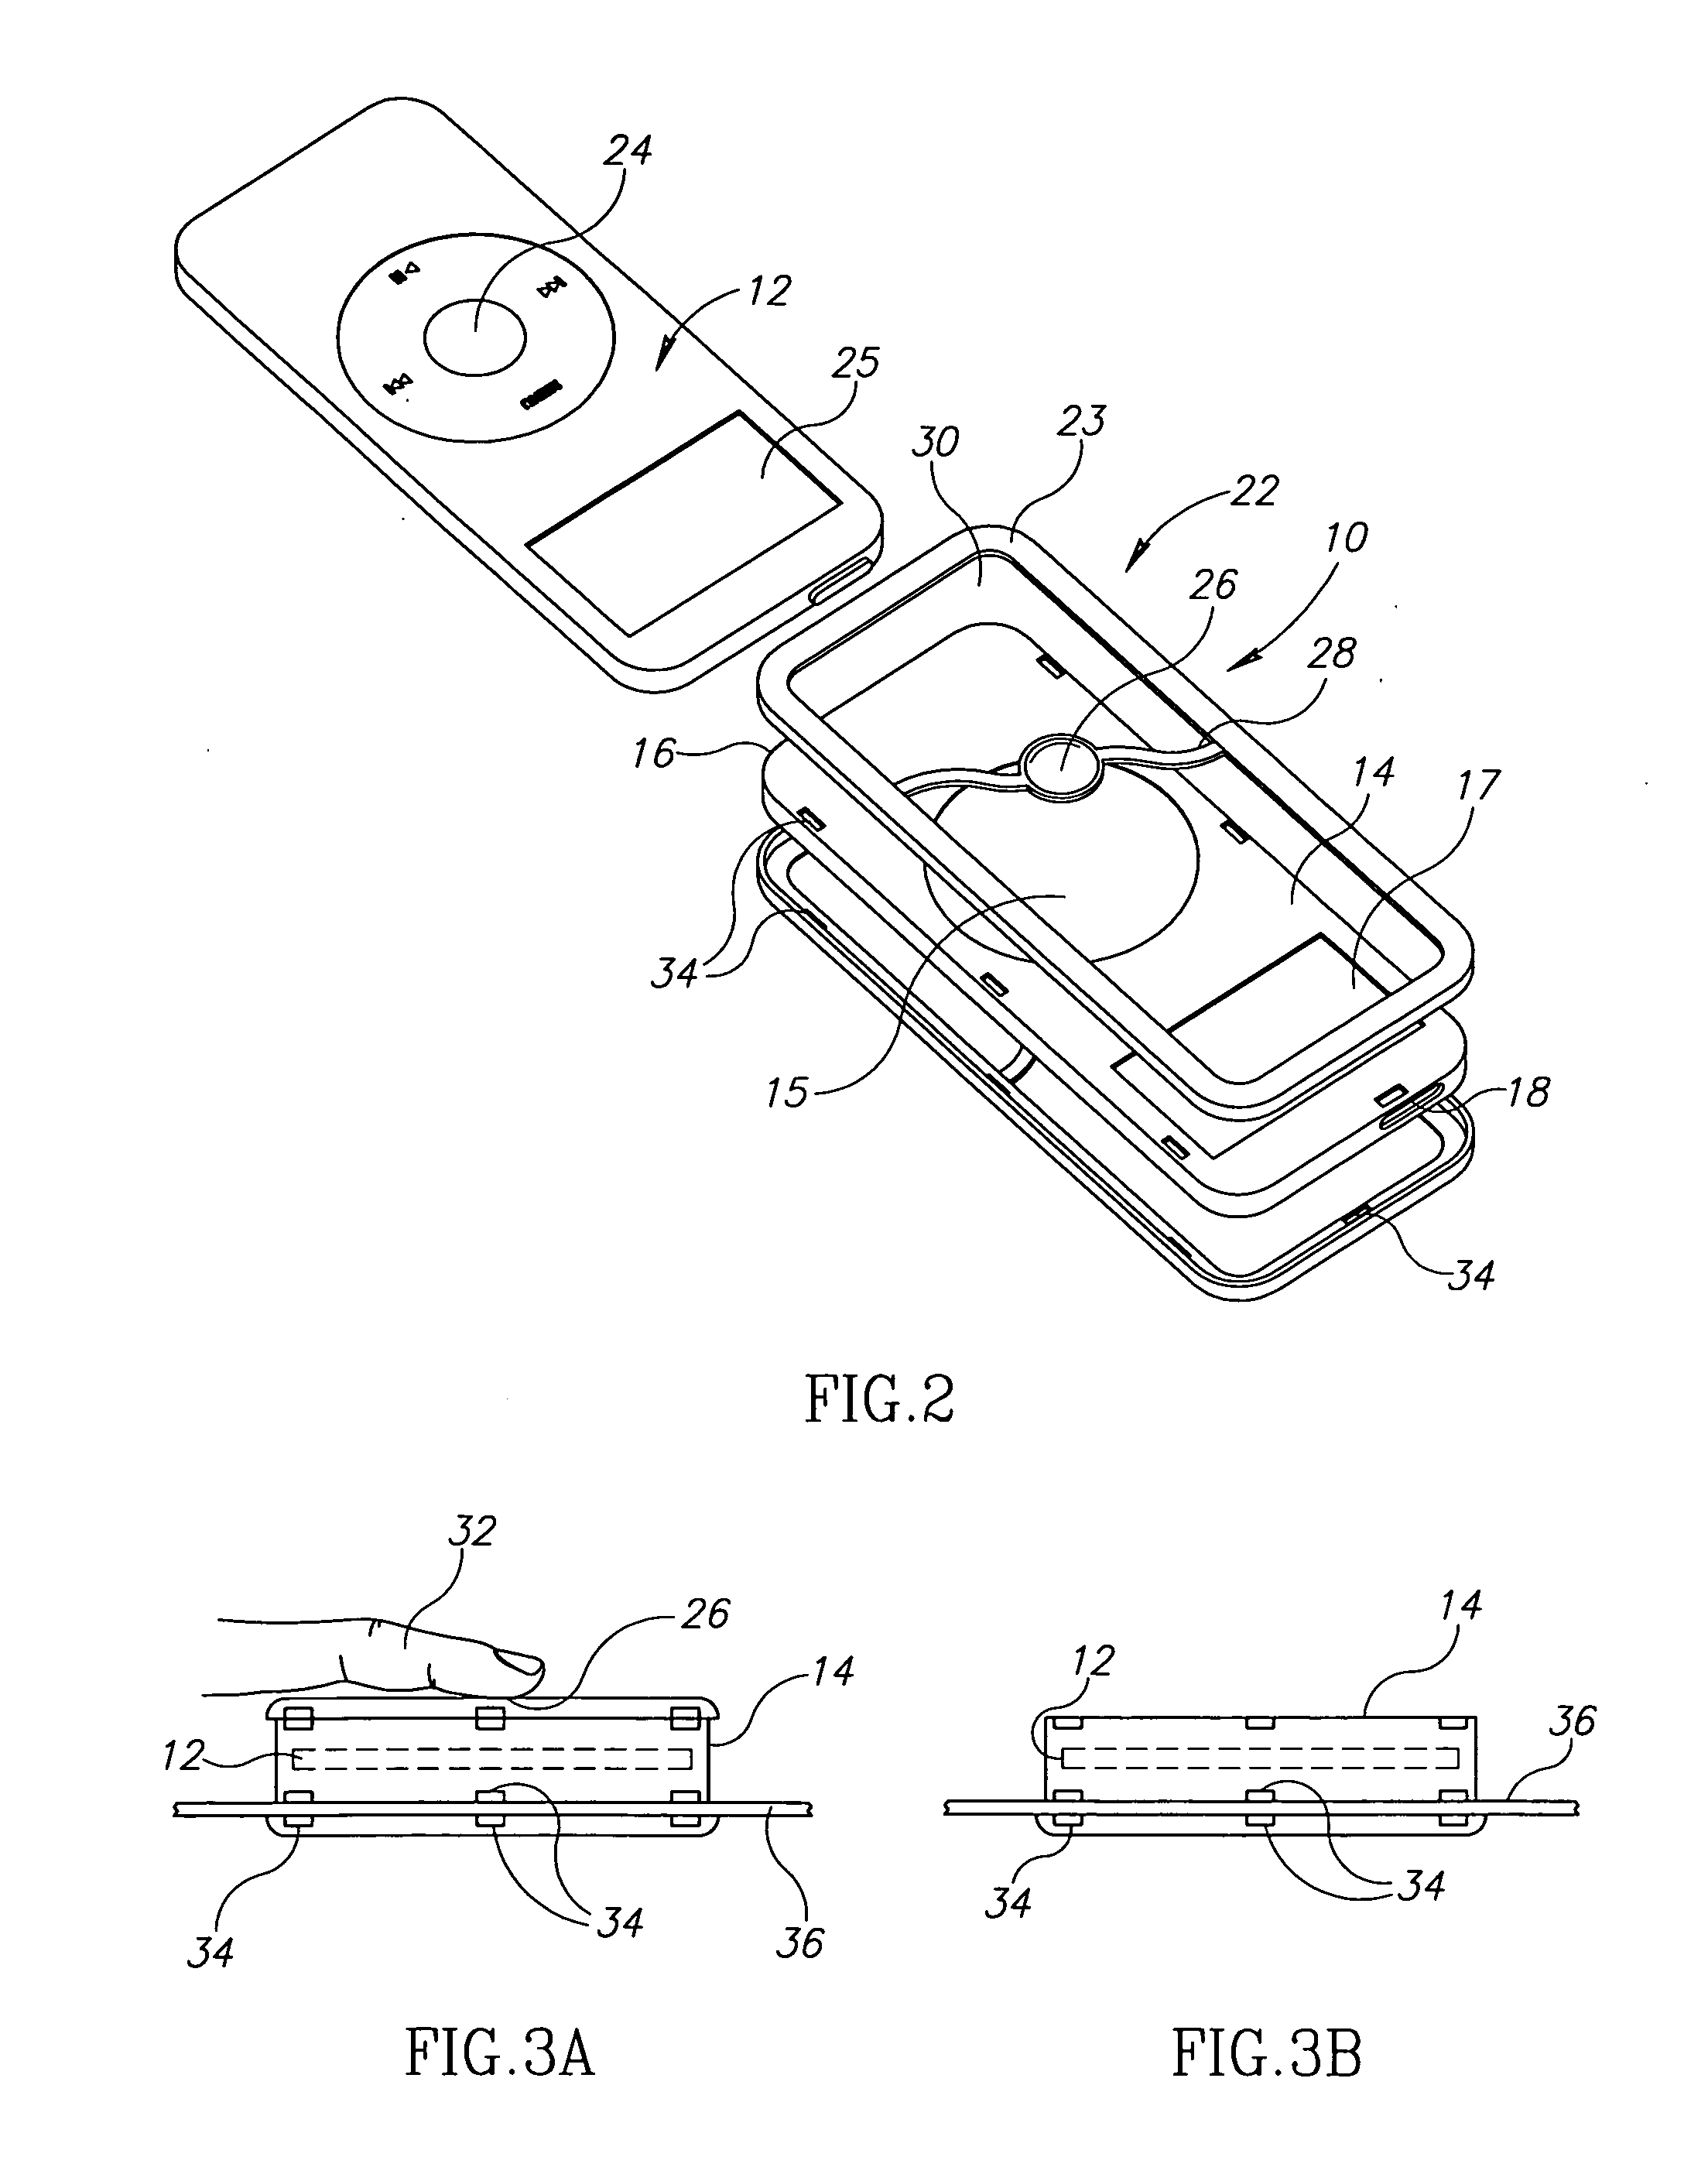 Holder for attaching items to clothing